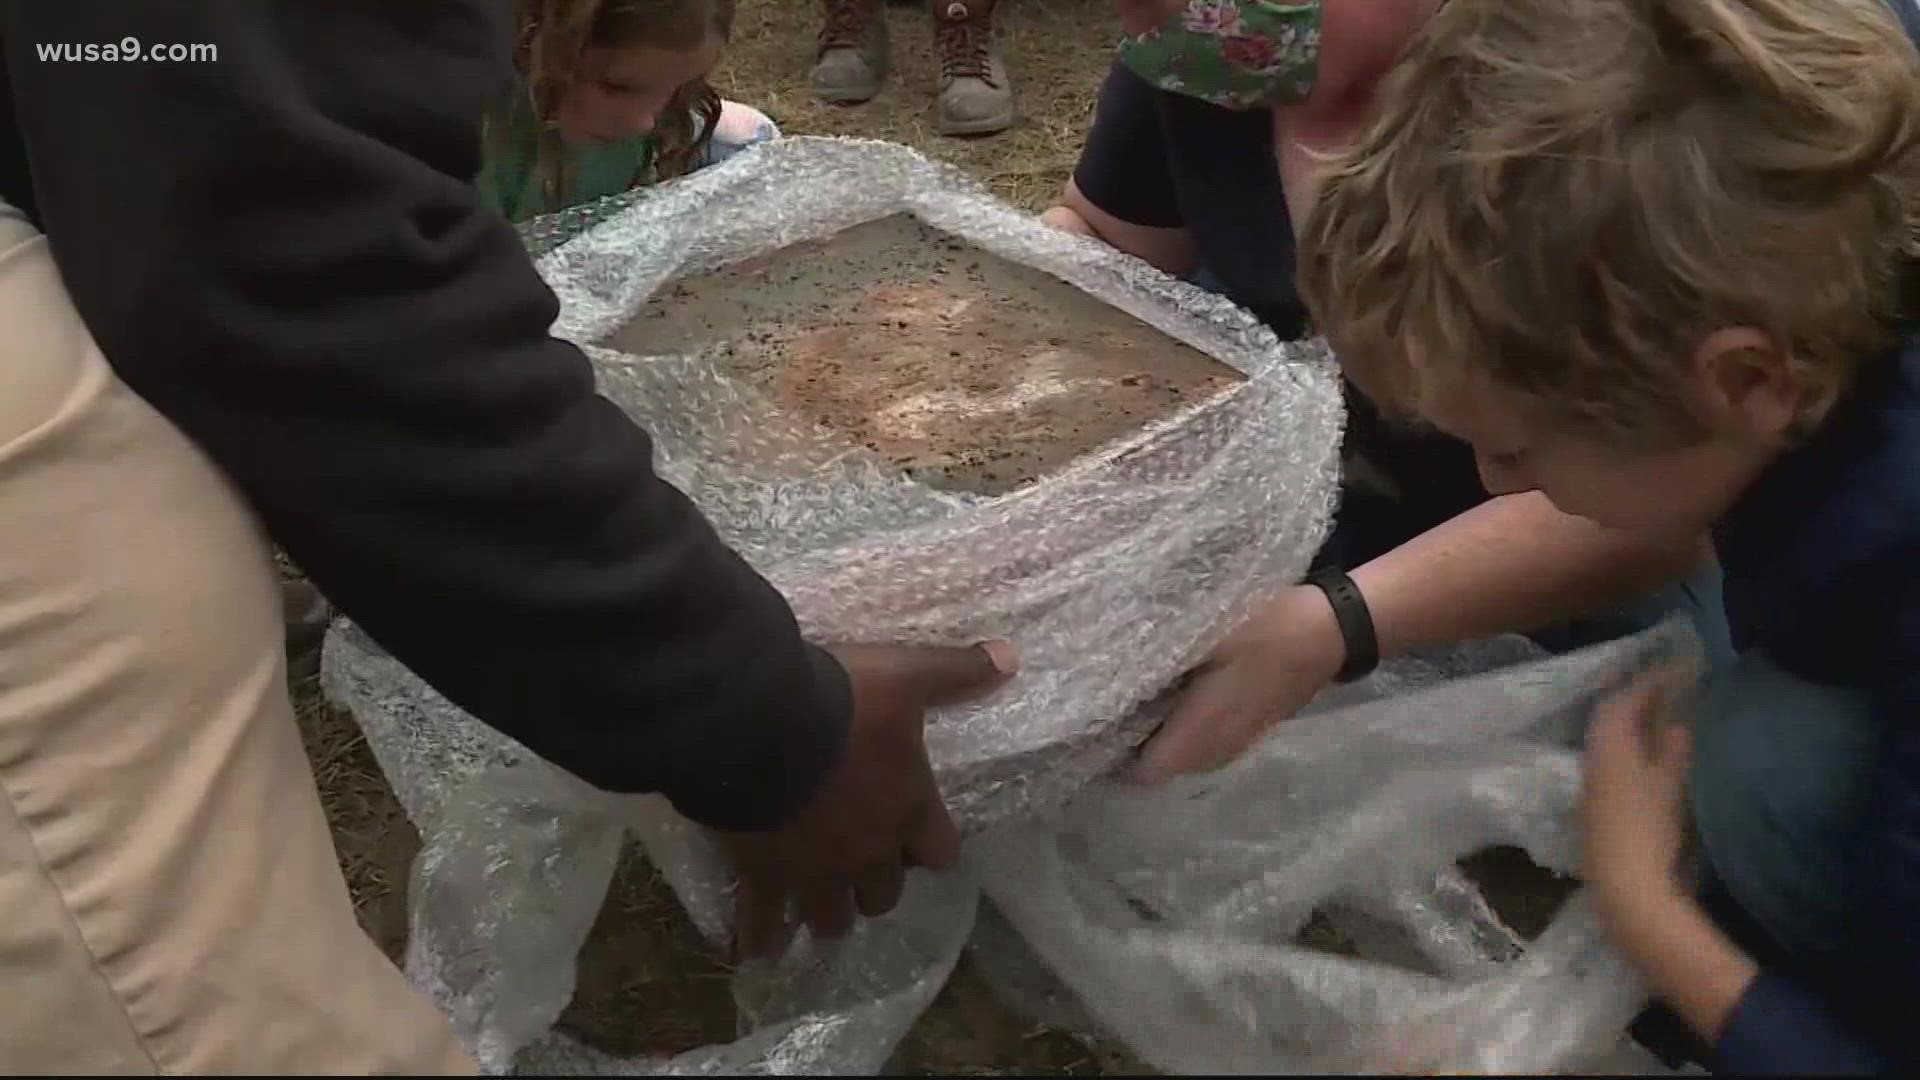 A second time capsule has been found where the Robert E. Lee statue was located in Richmond. Officials will see what's inside Thursday at 1 p.m.